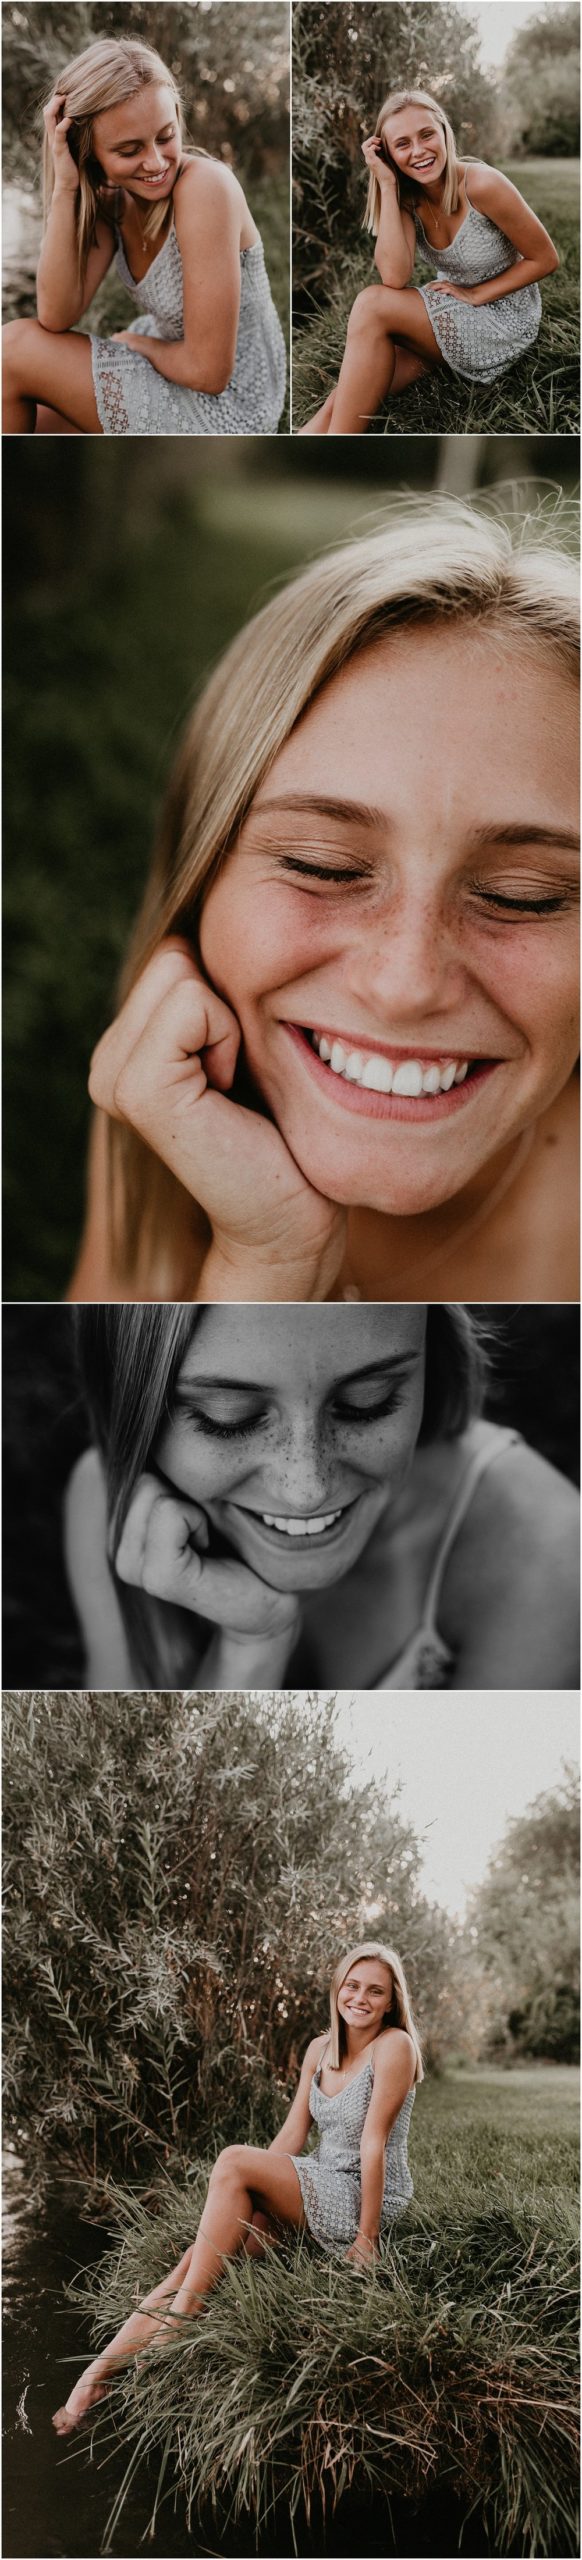 Boise Senior Photographer Makayla Madden Photography Kuna River Summer Senior Pictures Dress Outfit Ideas Beautiful Class of 2018 Freckles Laughter Idaho Photographer